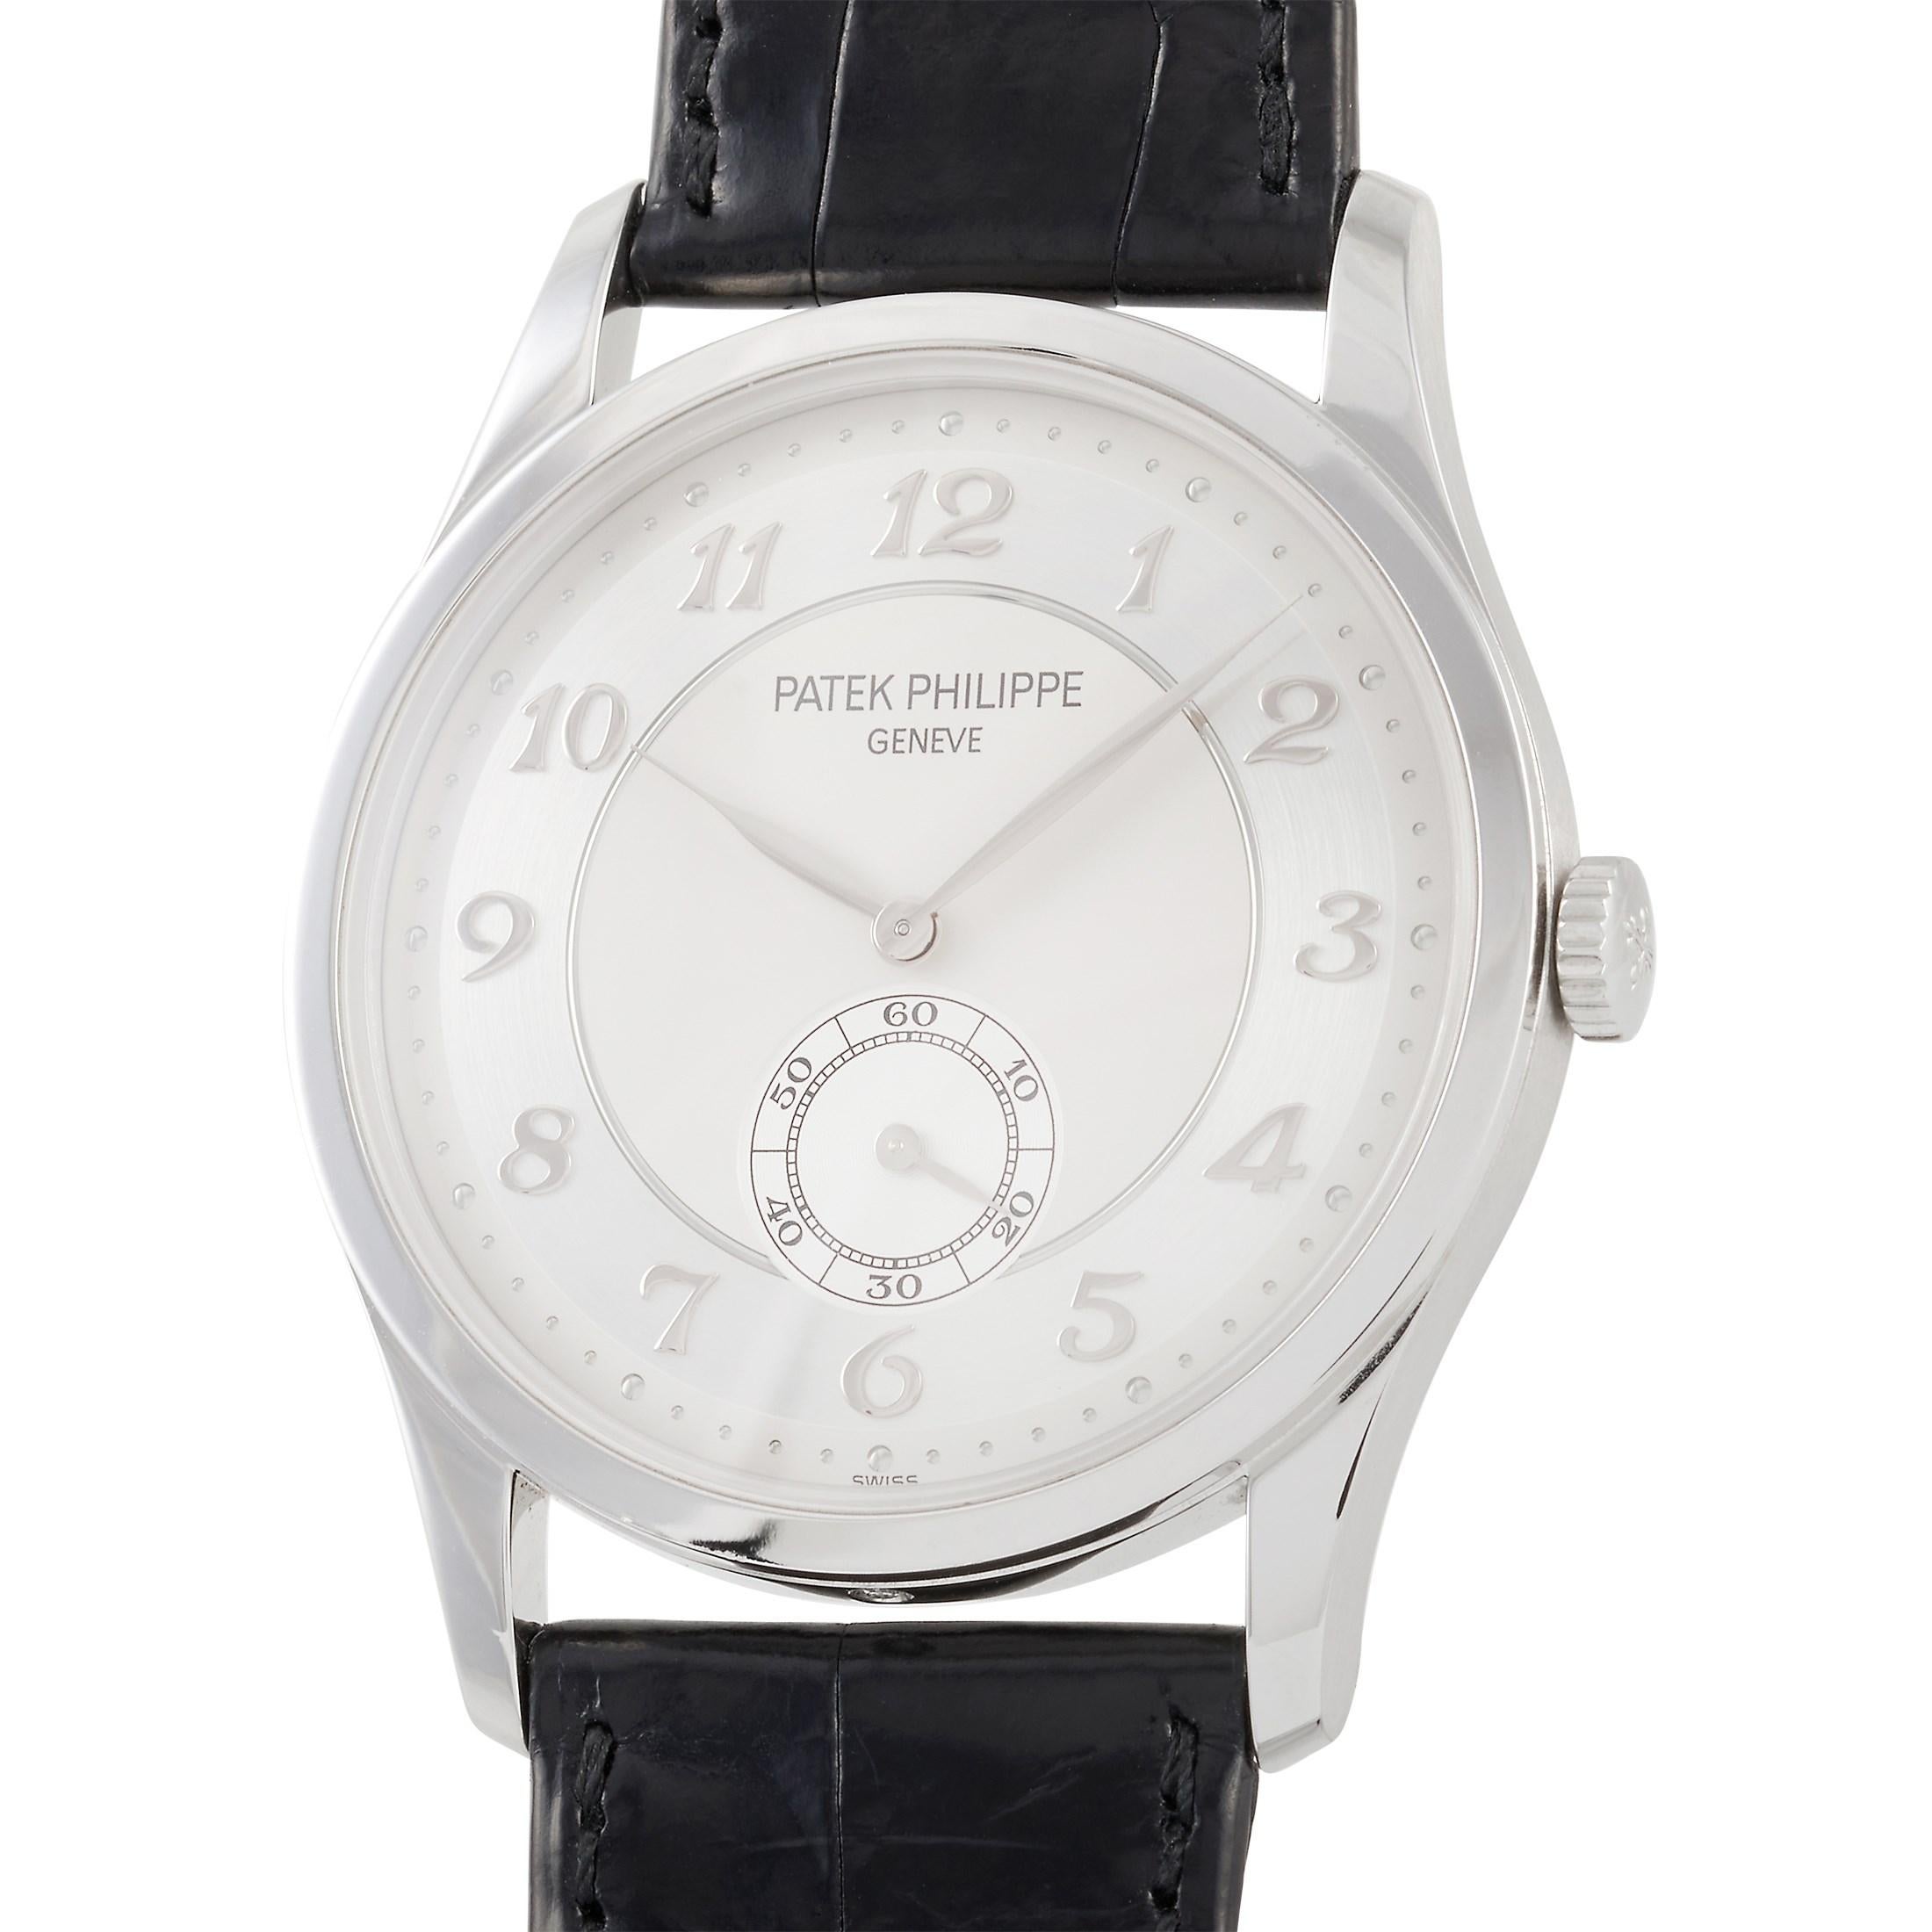 This Patek Phillipe Calatrava 37 mm Platinum Watch, reference number 5196P-001, comes with a platinum case that measures 37 mm in diameter. The case is presented on black leather strap with tang clasp. The white dial displays hours, minutes, and